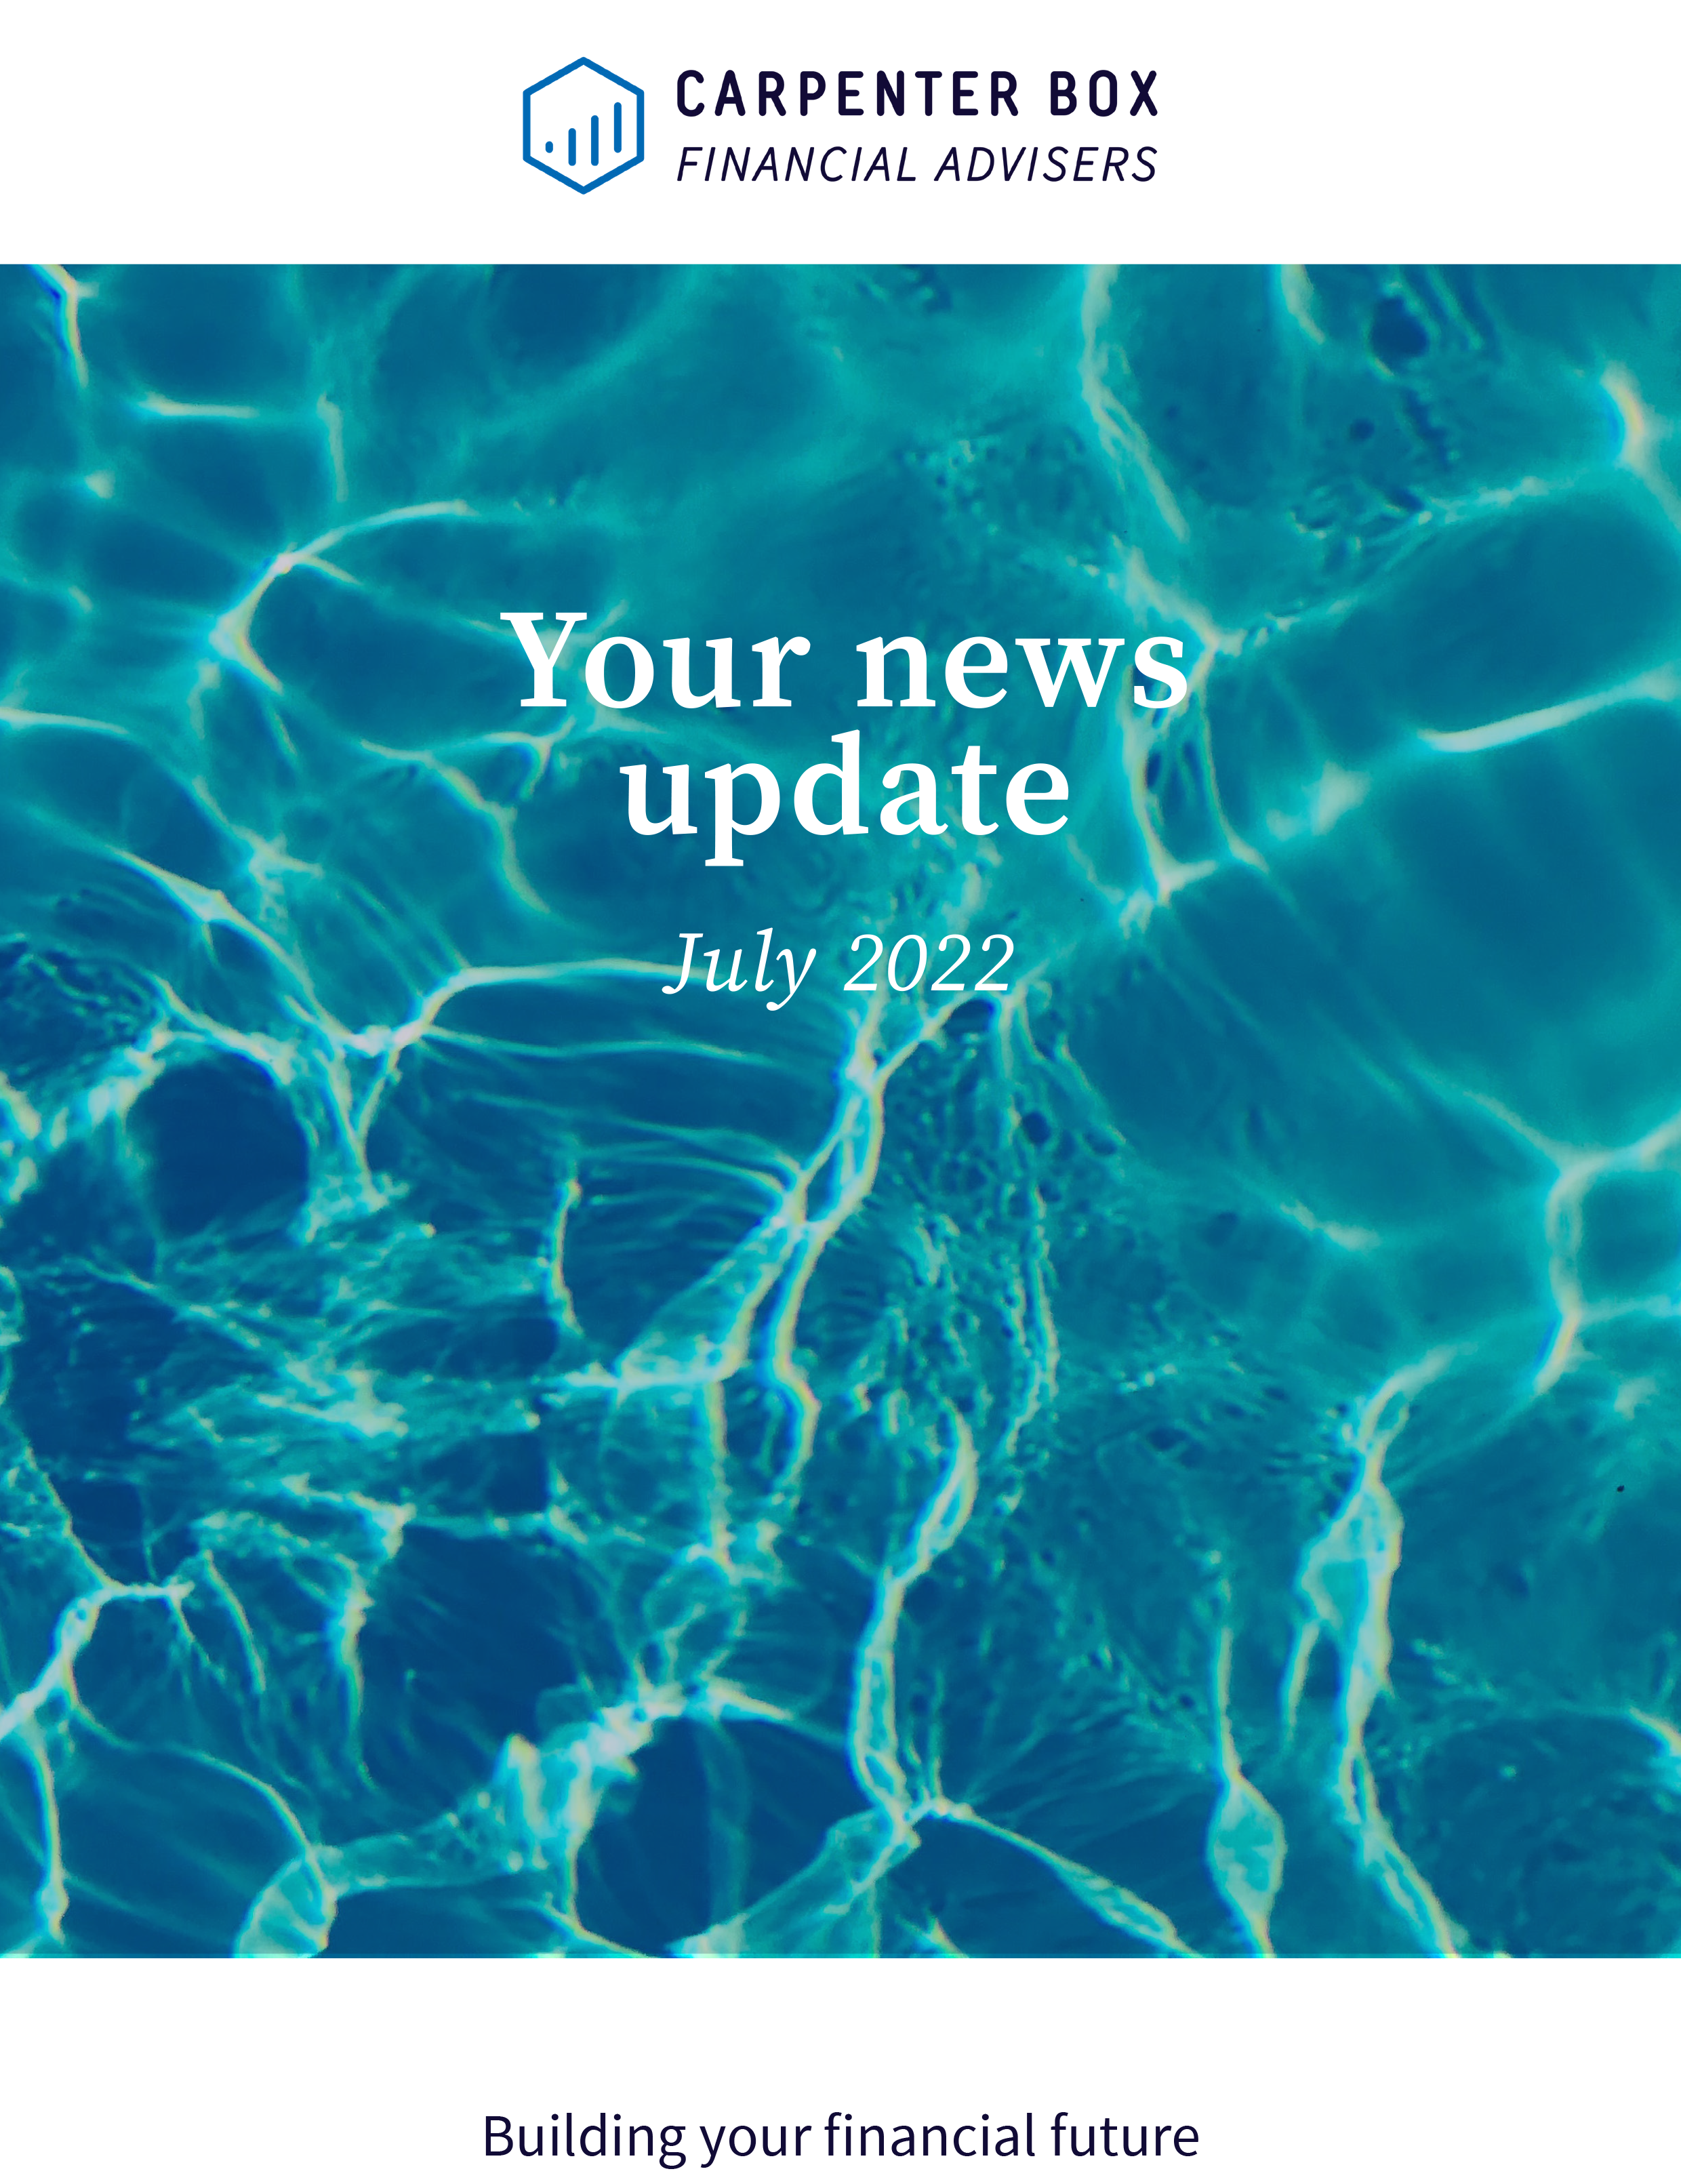 Financial Advisers update July 2022